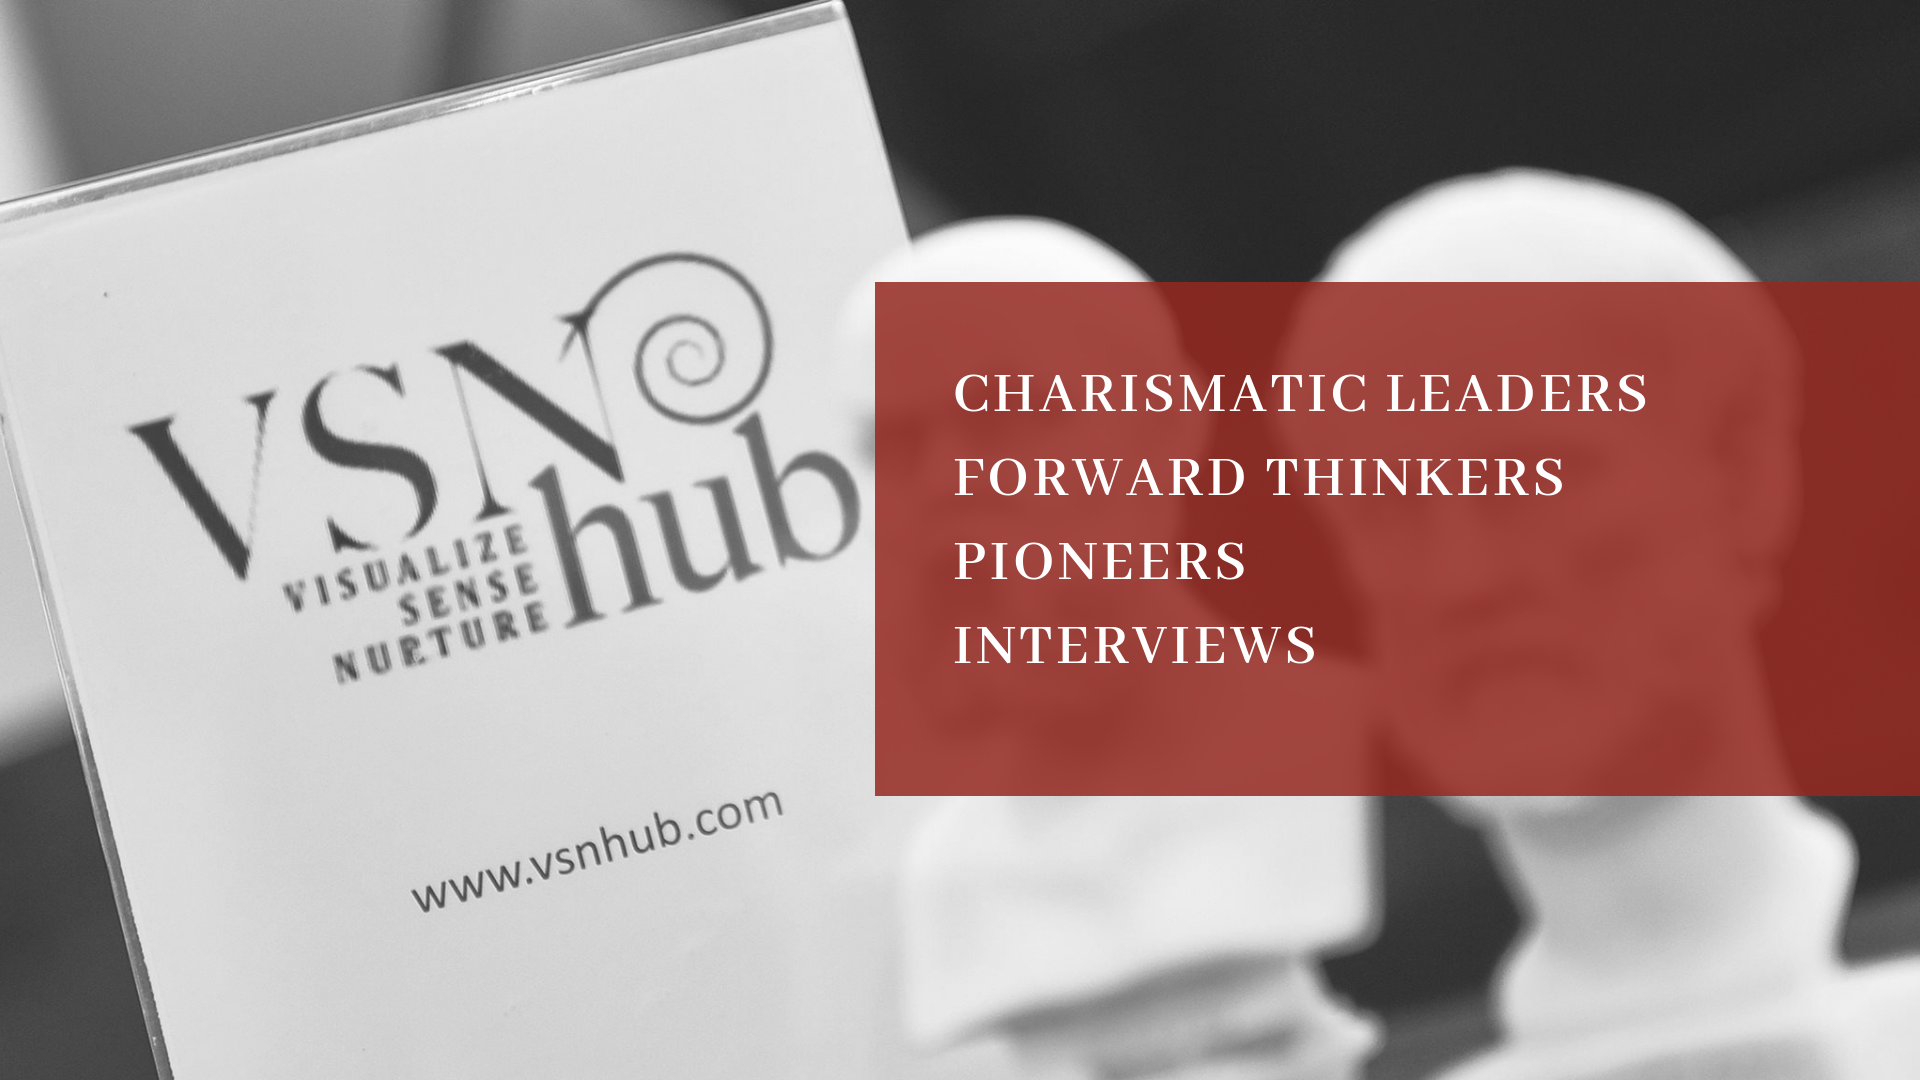 Charismatic Leaders Interviews